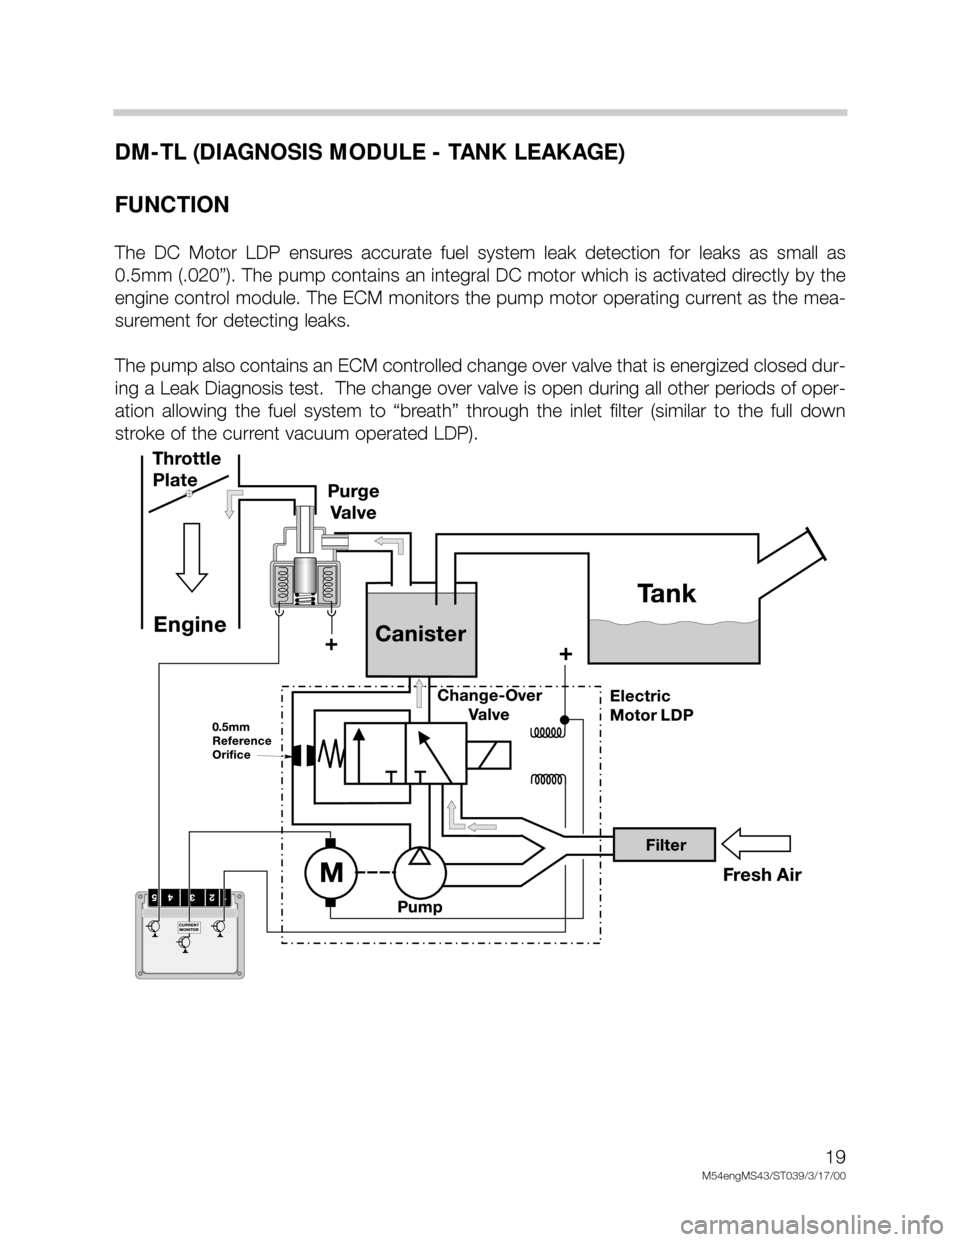 BMW X5 1999 E53 M54 Engine User Guide 19
M54engMS43/ST039/3/17/00
DM-TL (DIAGNOSIS MODULE - TANK LEAKAGE)
FUNCTION
The  DC  Motor  LDP  ensures  accurate  fuel  system  leak  detection  for  leaks  as  small  as
0.5mm (.020”). The pump 